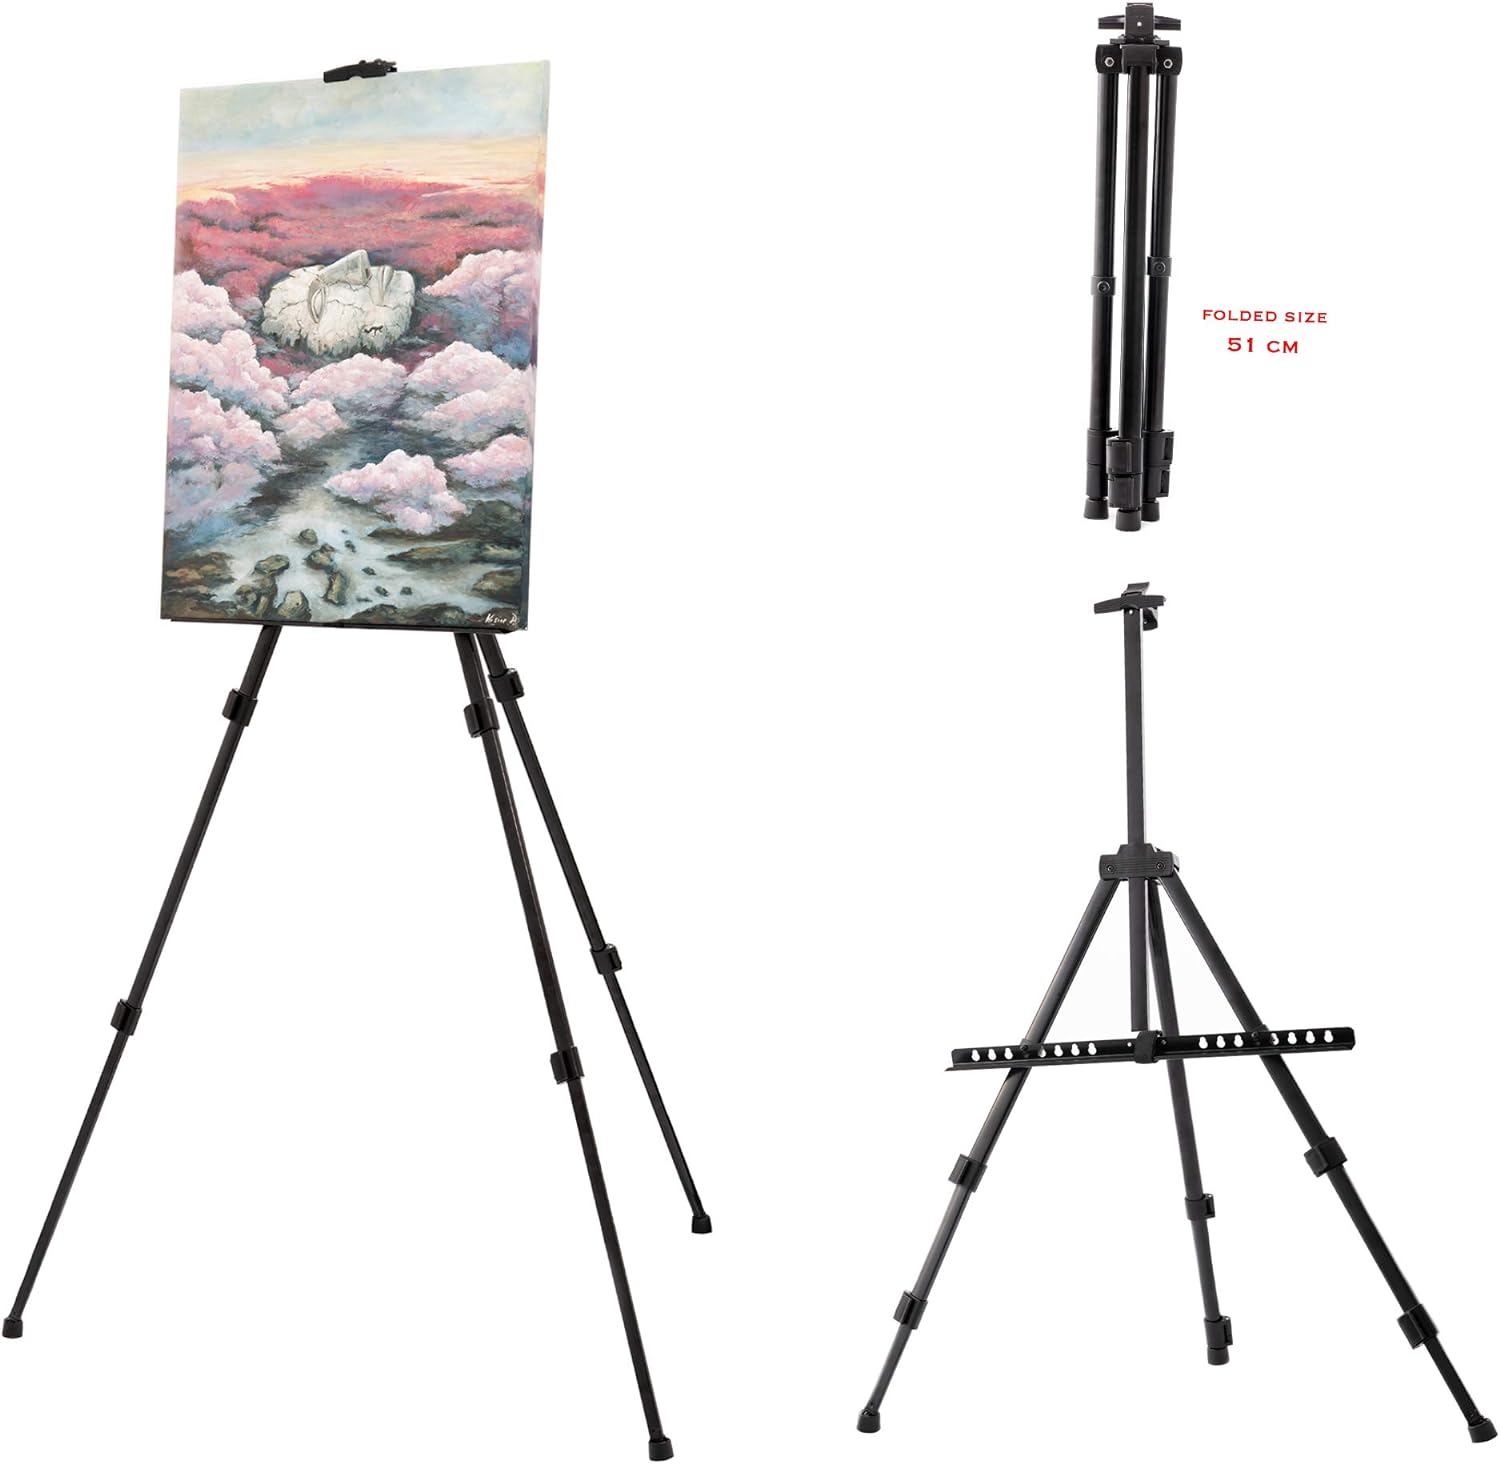 ADEPTNA NEW HEAVY DUTY FOLDING ARTIST TELESCOPIC FIELD STUDIO PAINTING CANVAS EASEL TRIPOD DISPLAY STAND WITH CARRY BAG